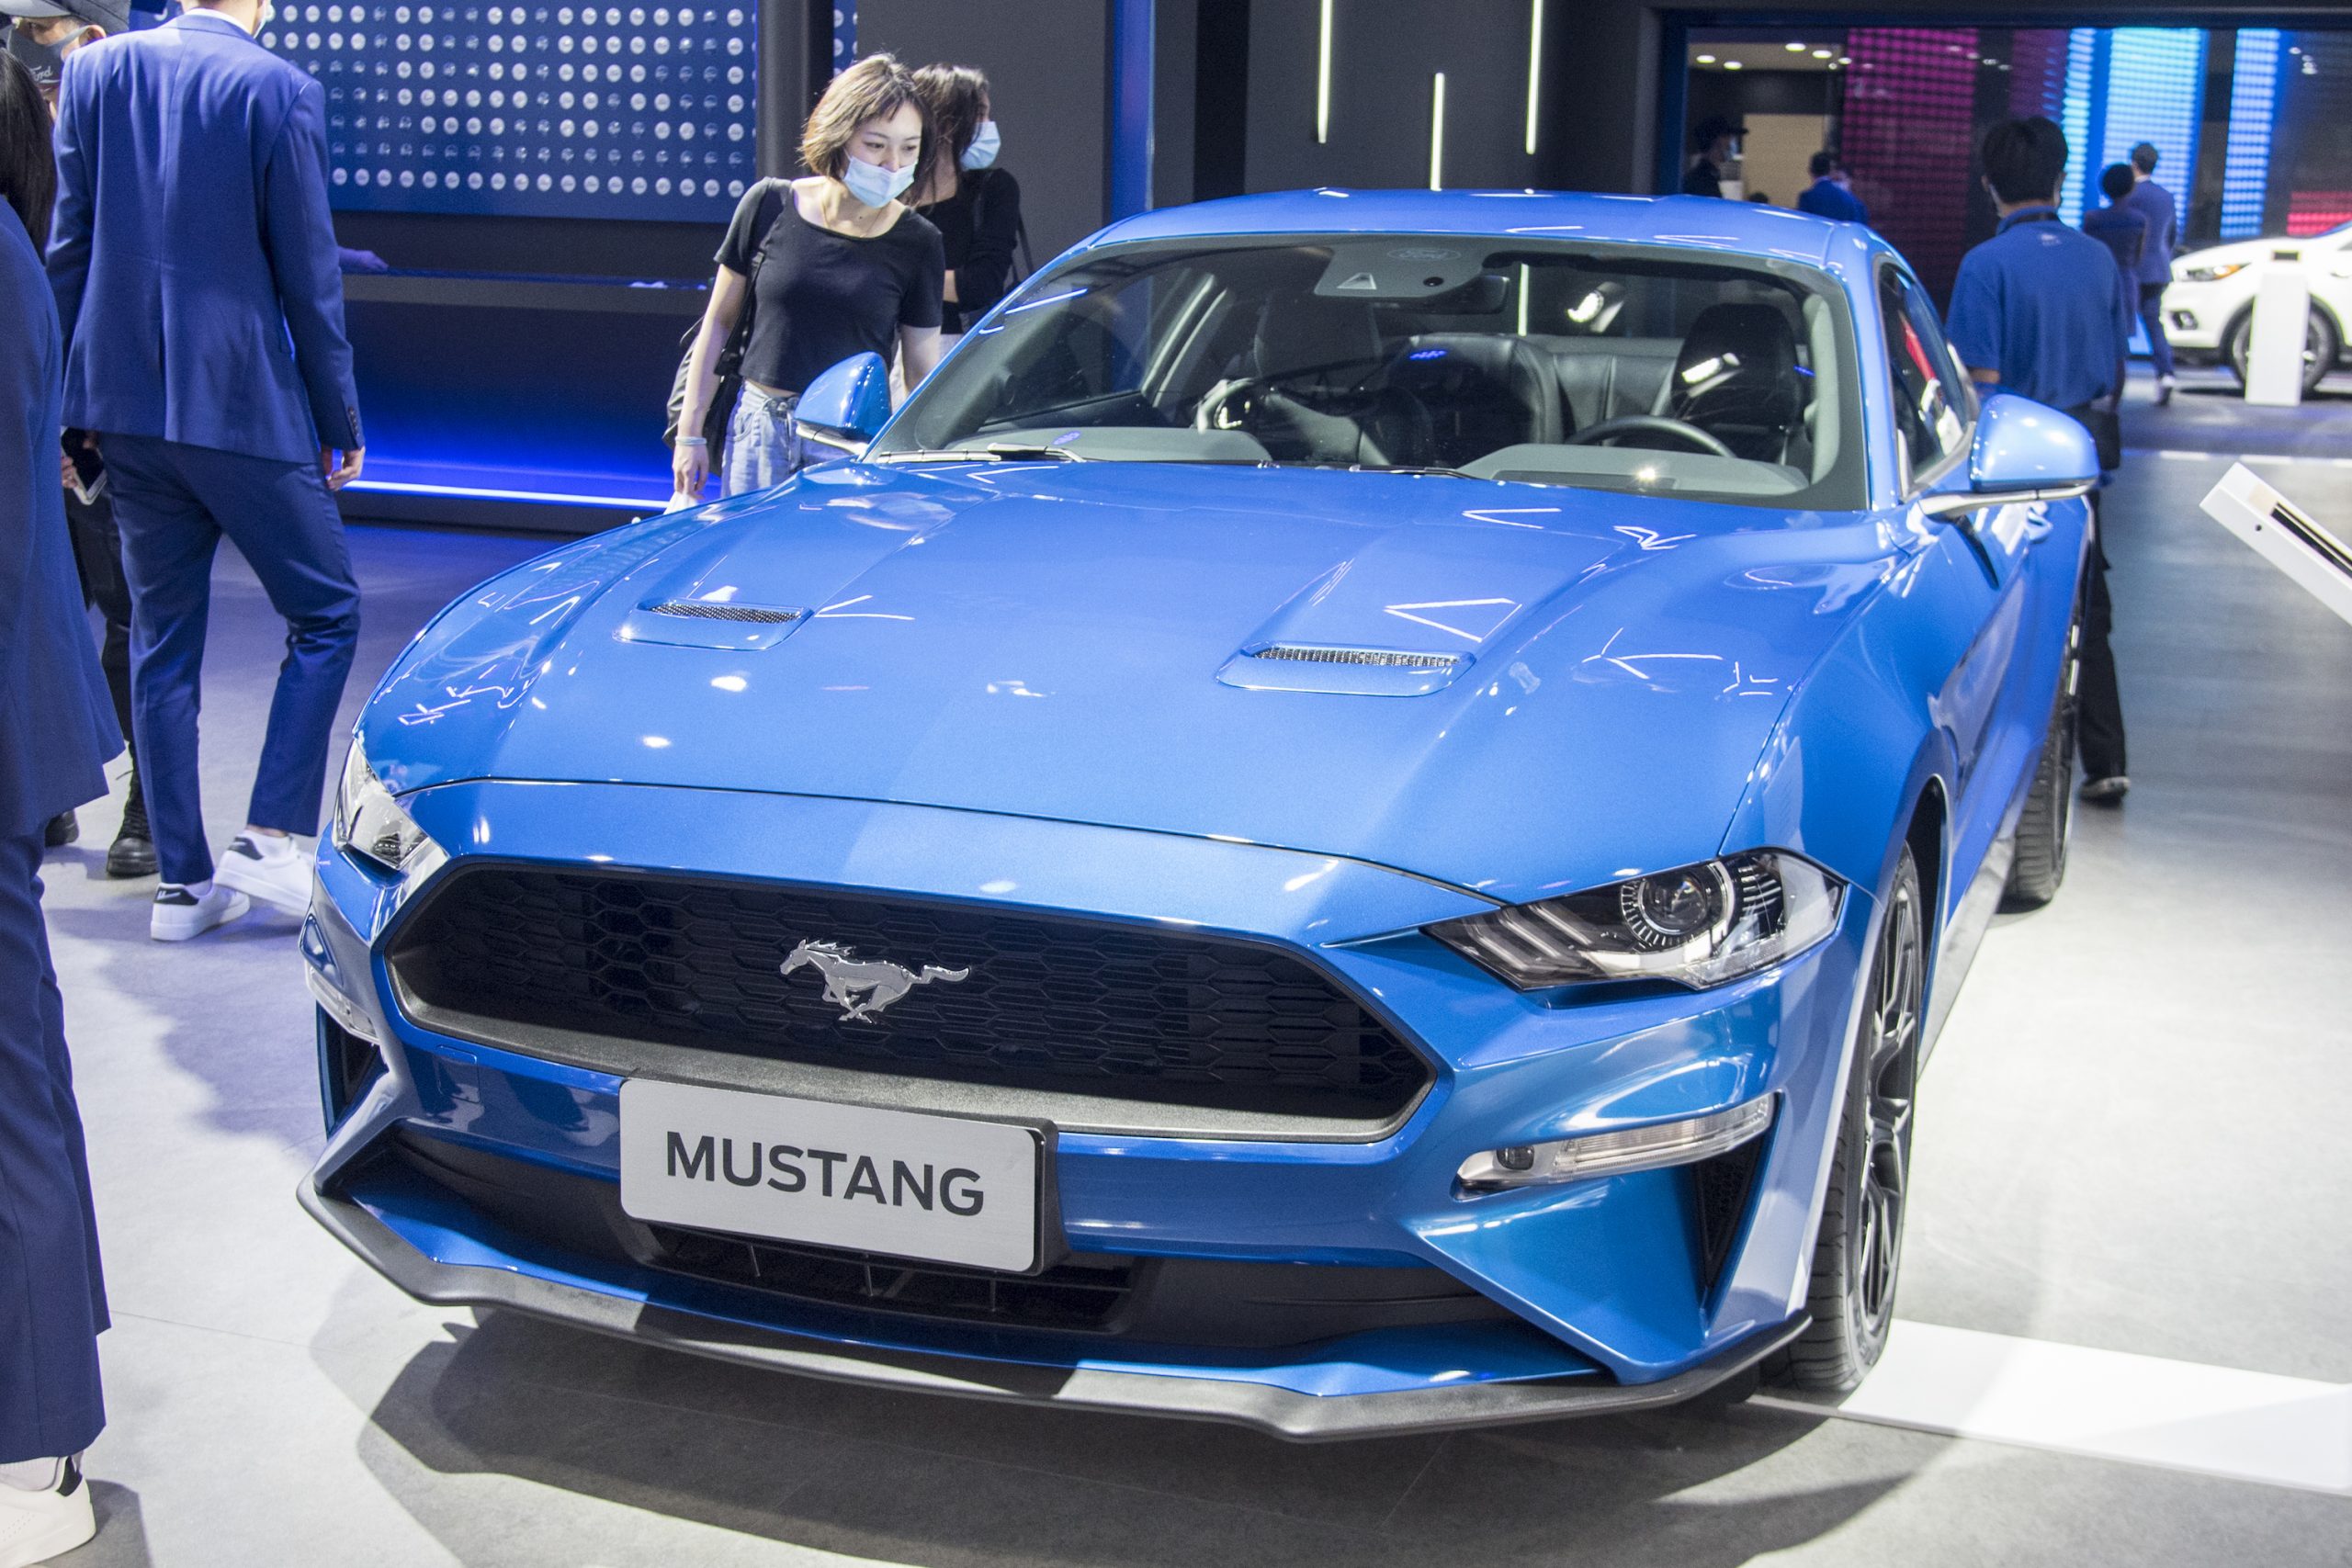 A Ford Mustang sports car is on display during the 18th Guangzhou International Automobile Exhibition